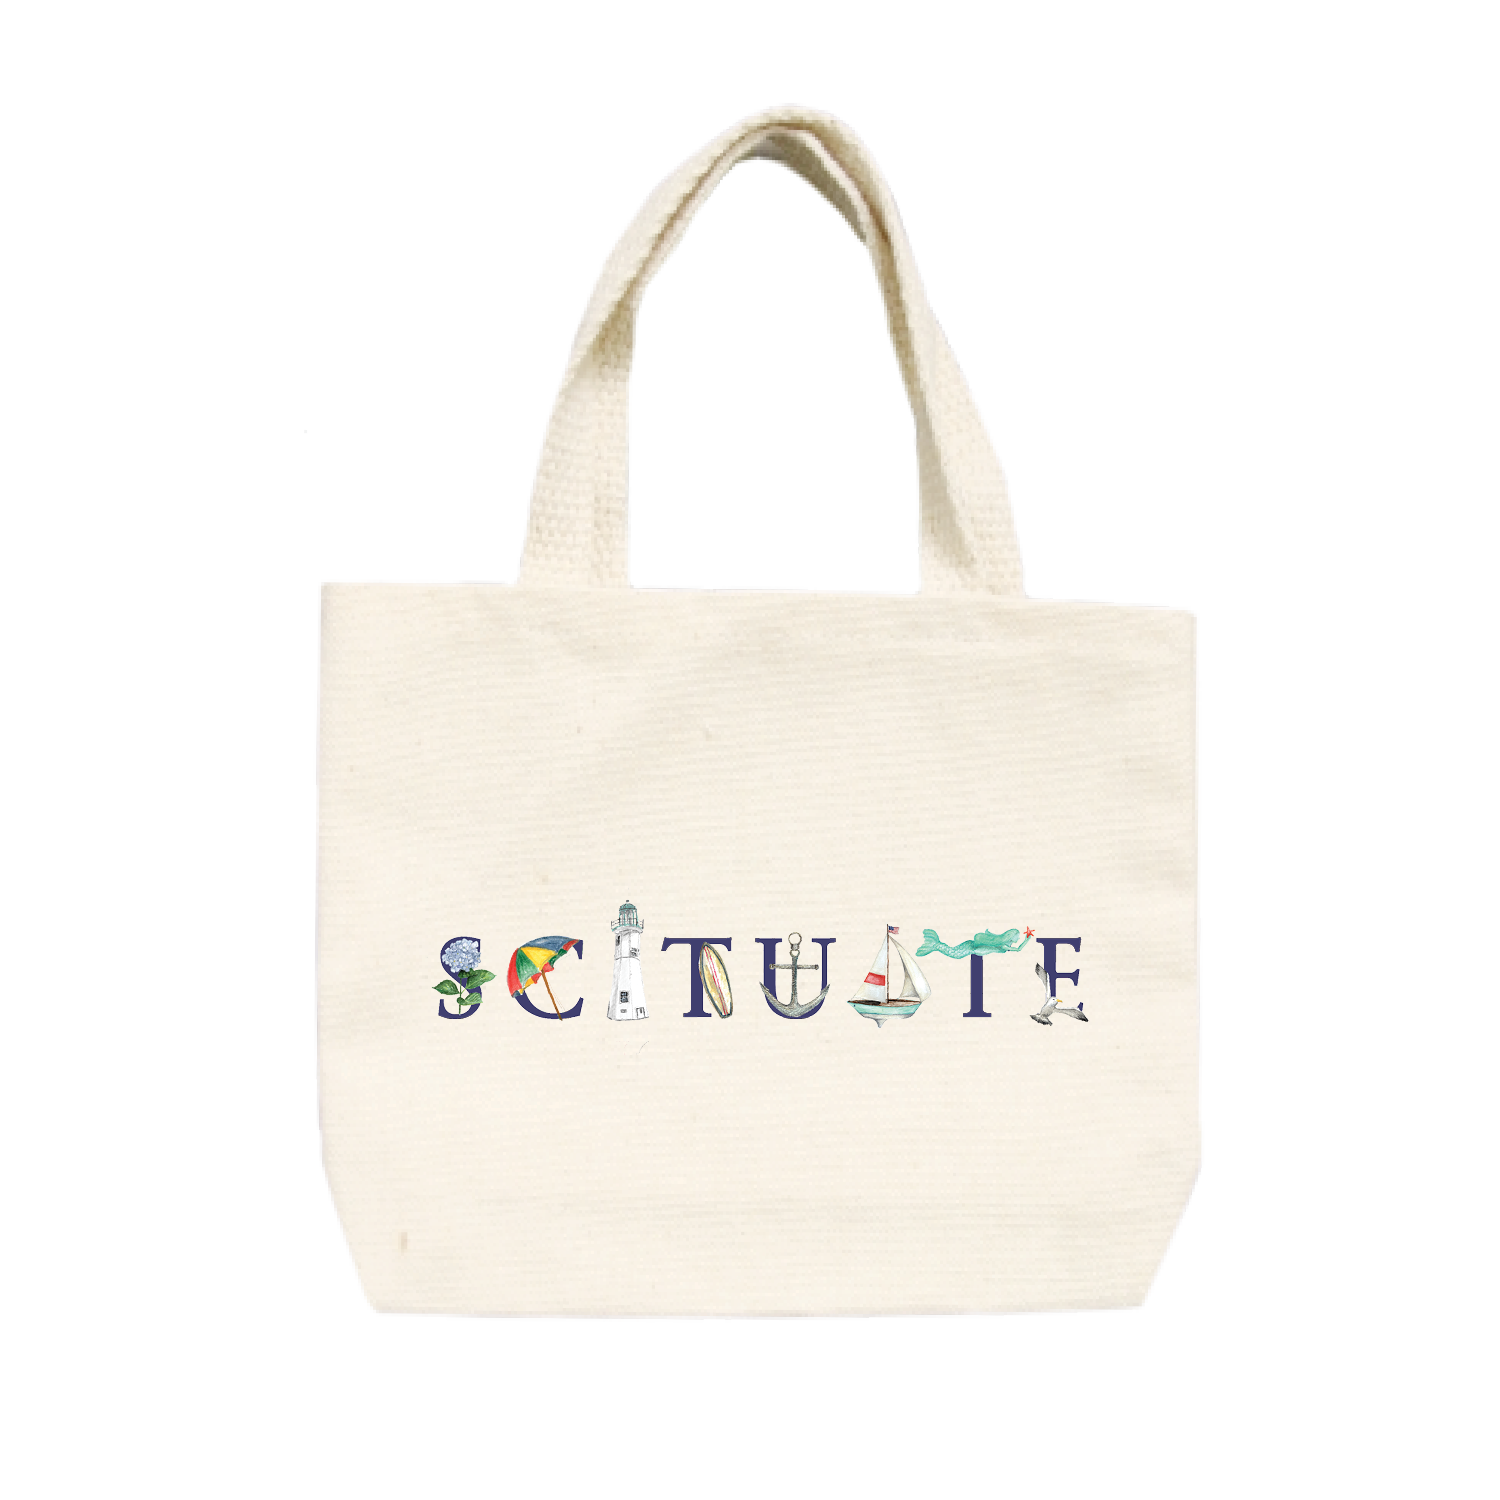 Scituate small tote